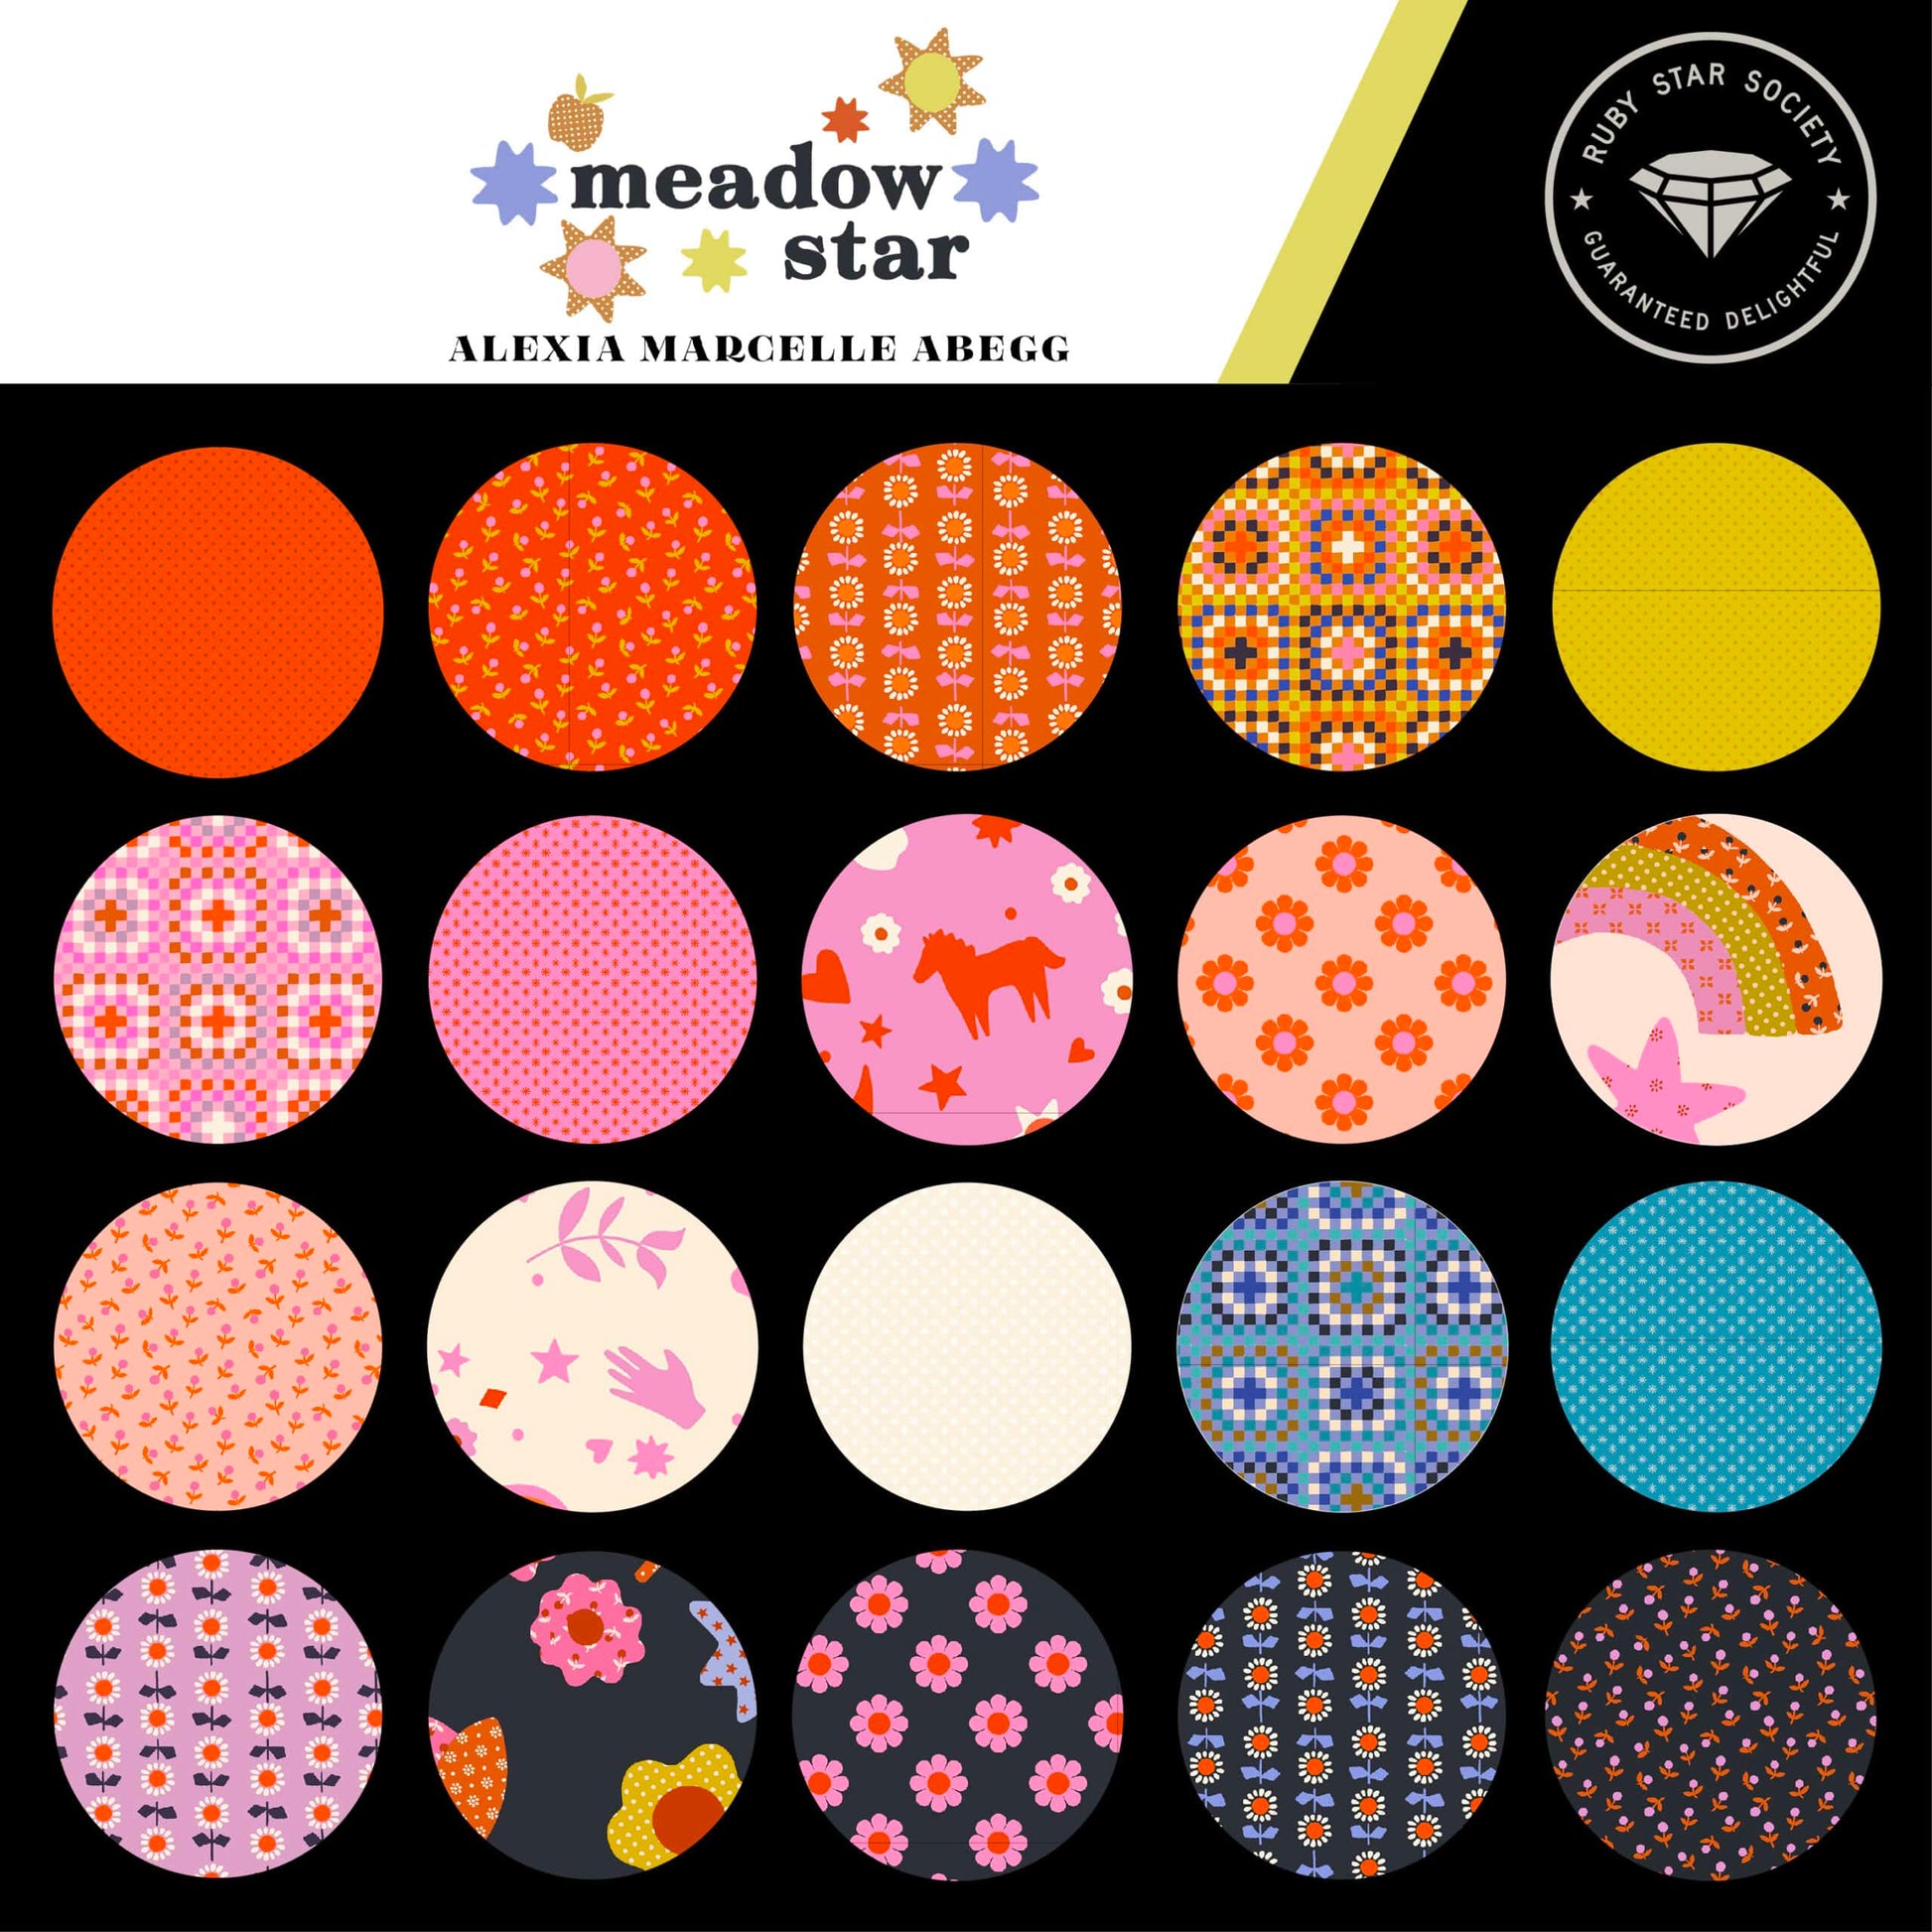 This FAT QUARTER BUNDLE contains 26 quilting cotton prints from Meadow Star by Alexia Marcella Abegg for Ruby Star Society.  Manufacturer: Ruby Star Society Designer: Alexia Marcella Abegg Collection: Meadow Star Material: 100% Cotton  Weight: Quilting